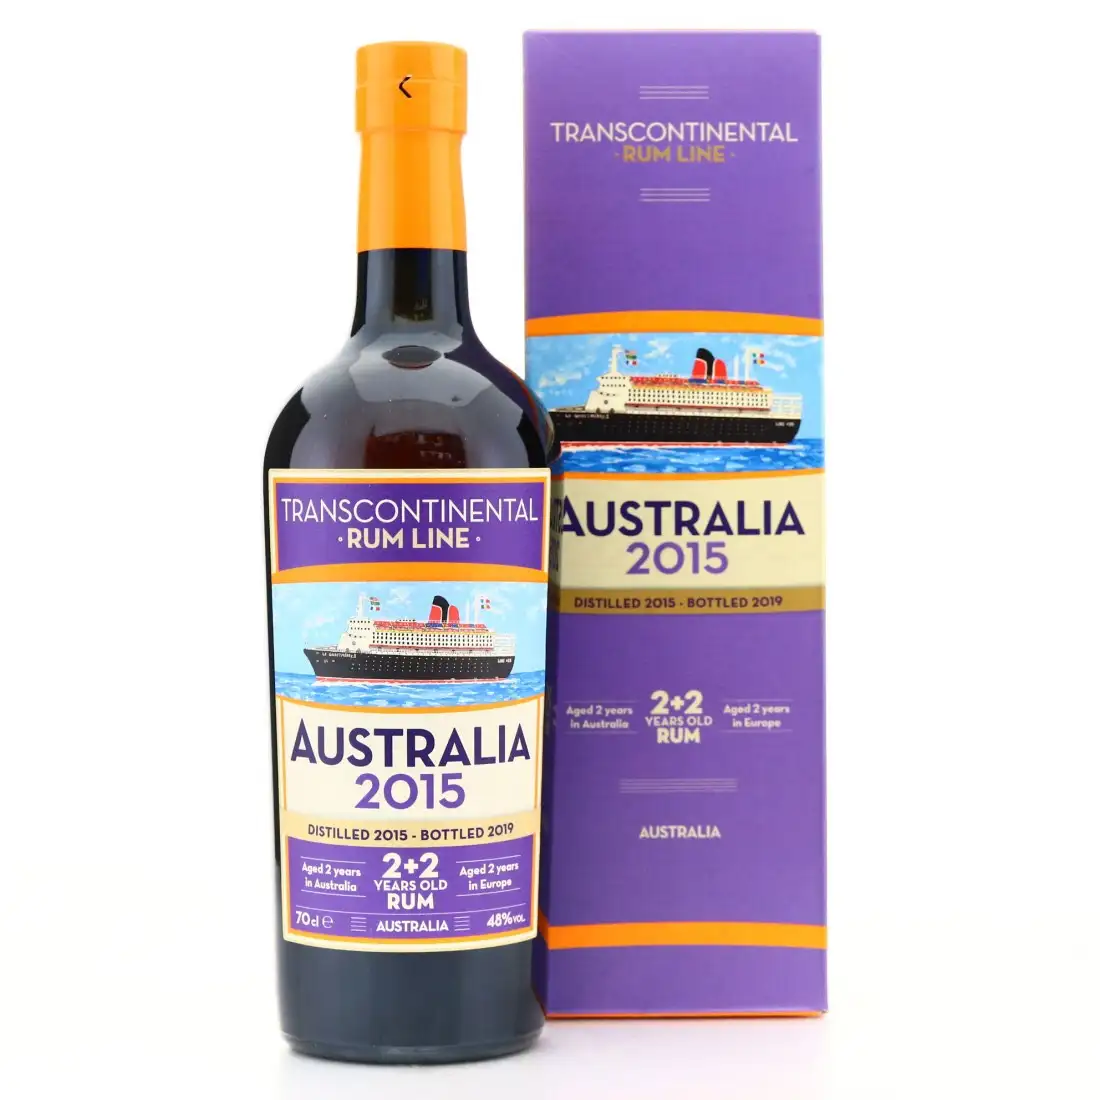 Image of the front of the bottle of the rum Australia #35